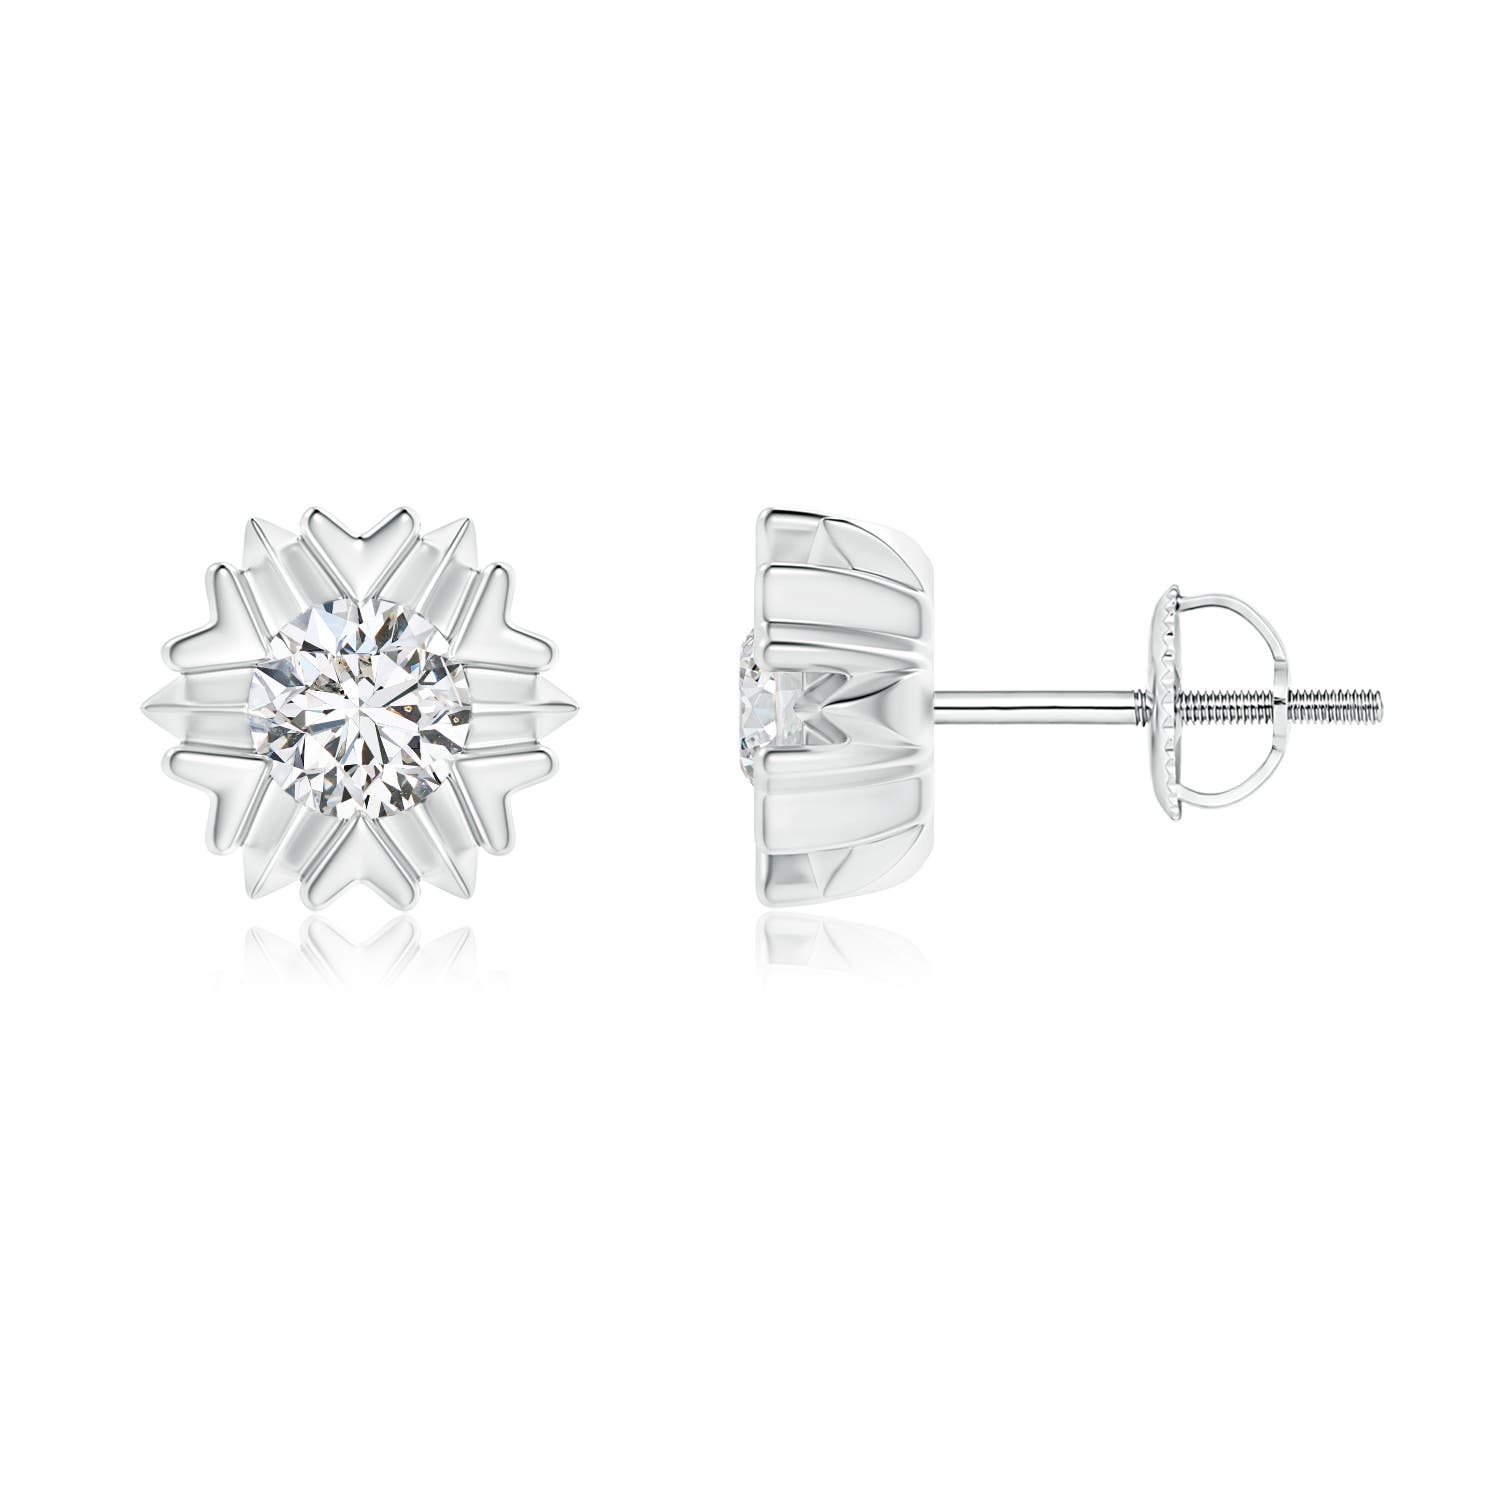 H, SI2 / 0.7 CT / 14 KT White Gold